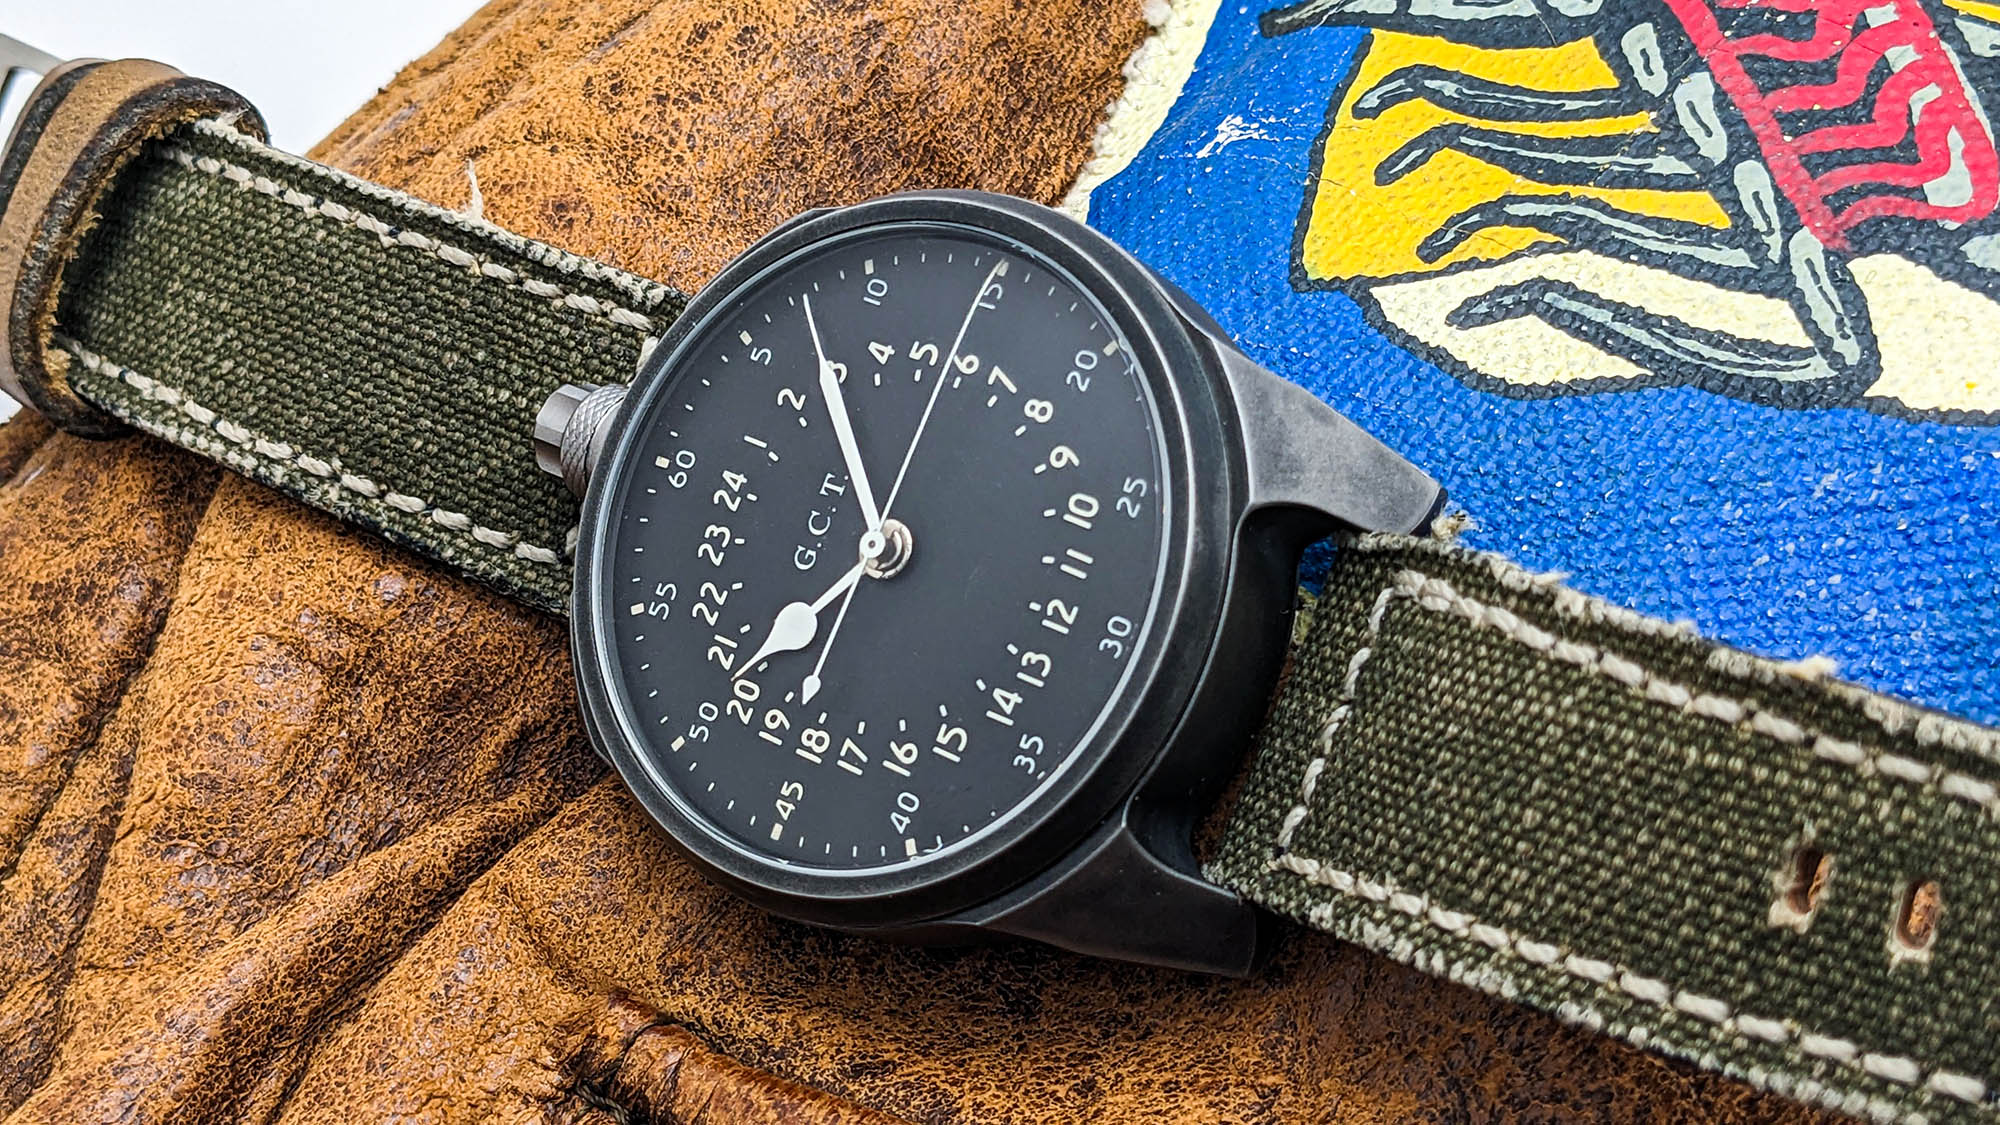 Vortic Watch Co. - Designed, Manufactured, and Built in America